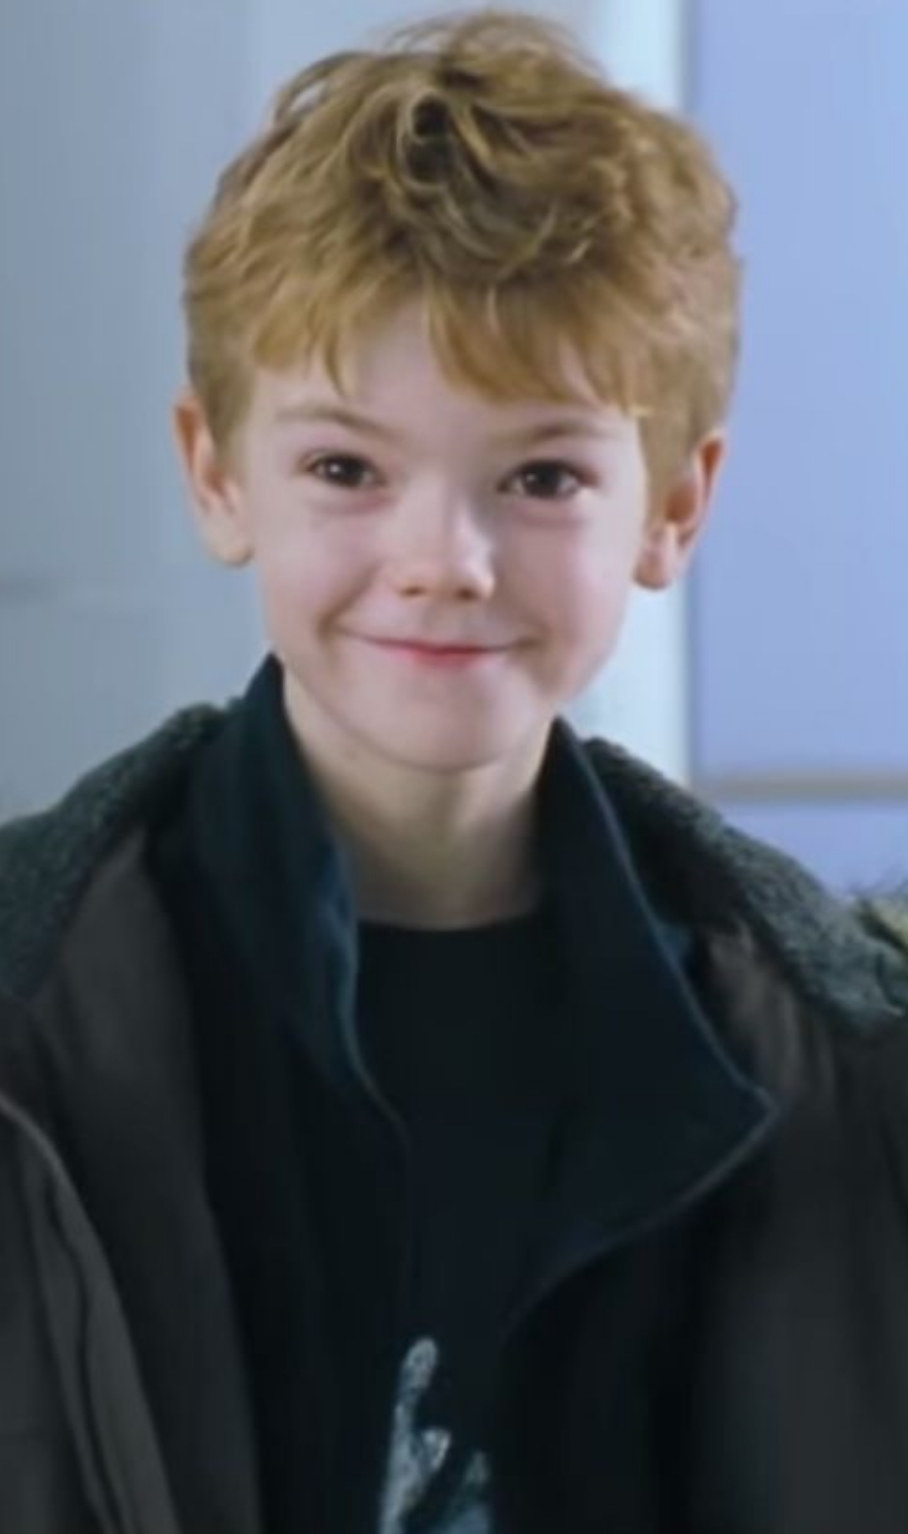 Brodie-Sangster smiling cutely in the airport scene